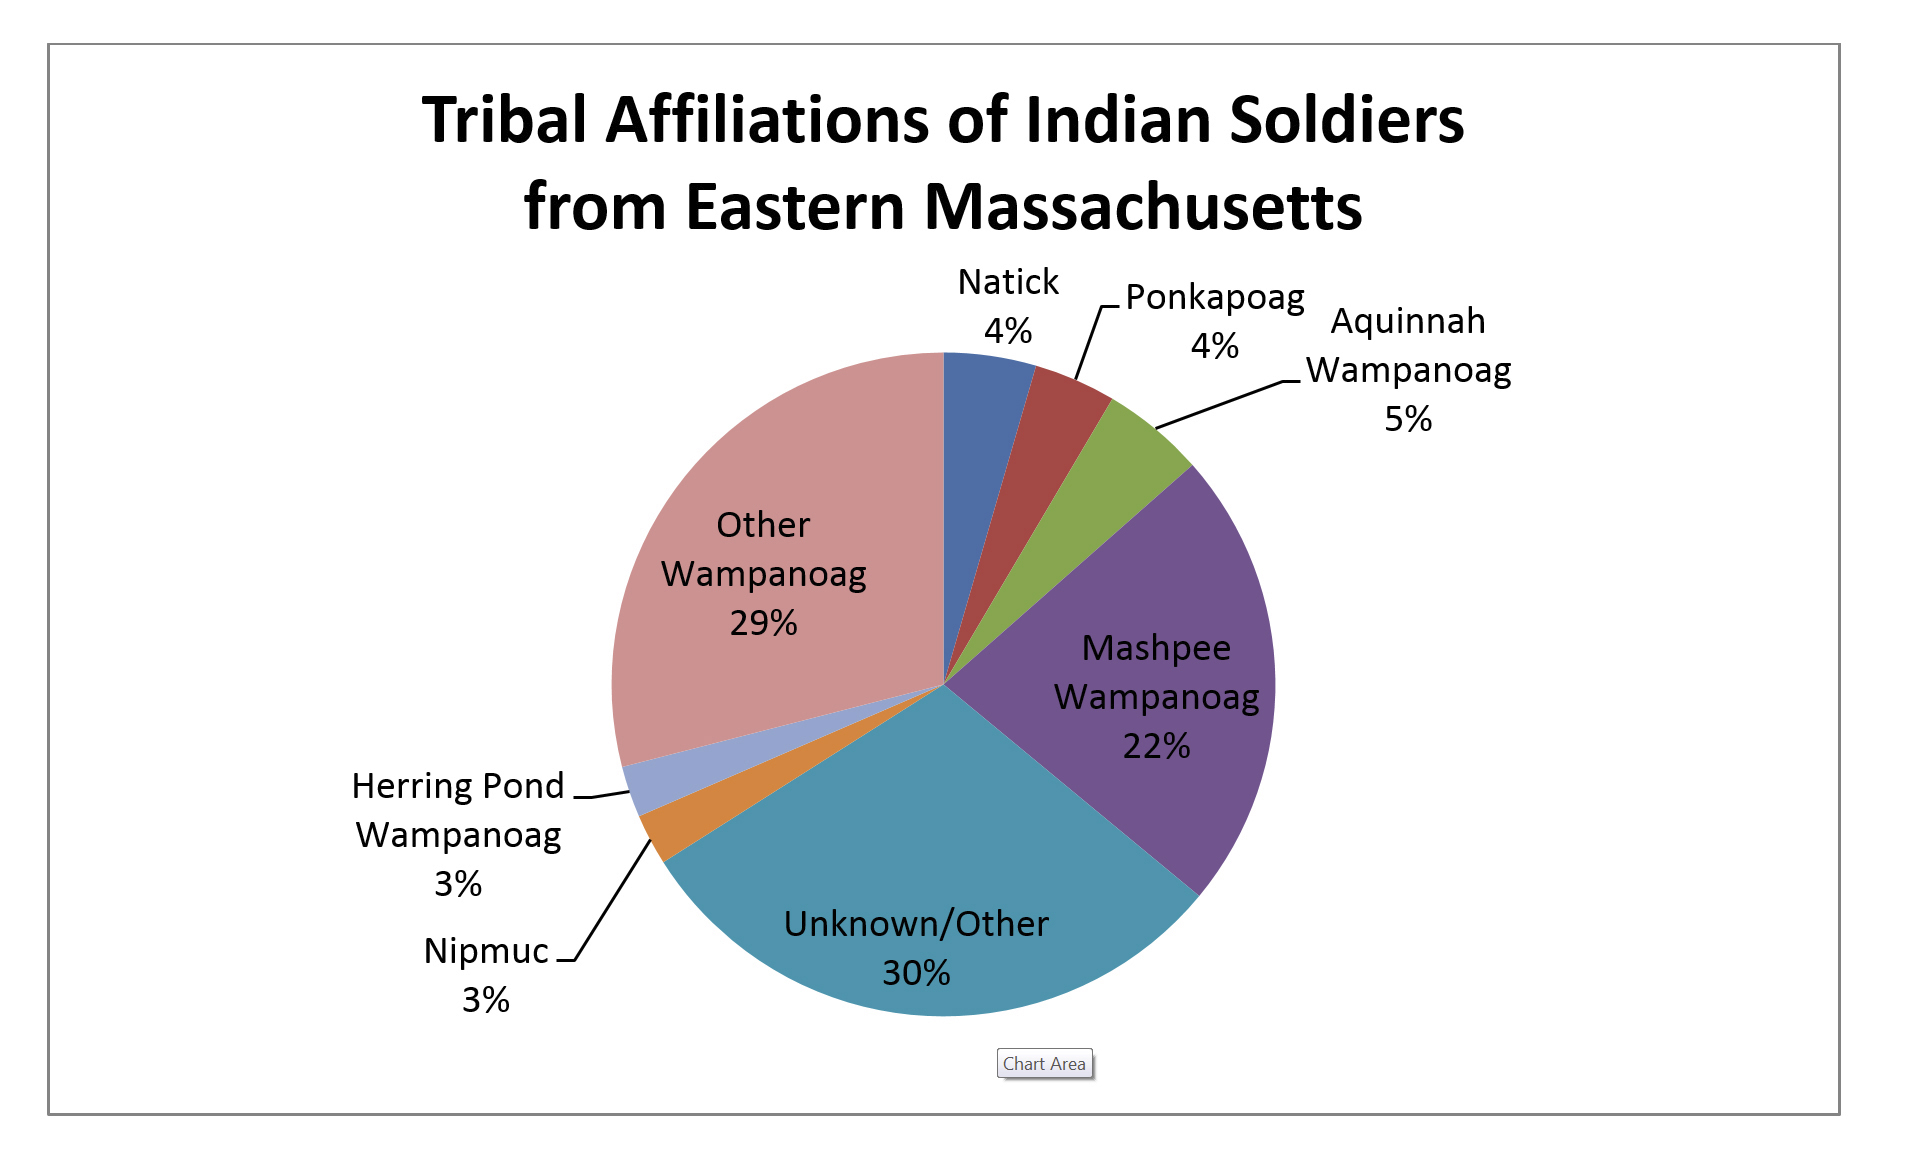 This chart prepared by David K. Thomas is based on research in Forgotten Patriots, Massachusetts Soldiers and Sailors, deserter ads, and other resources.